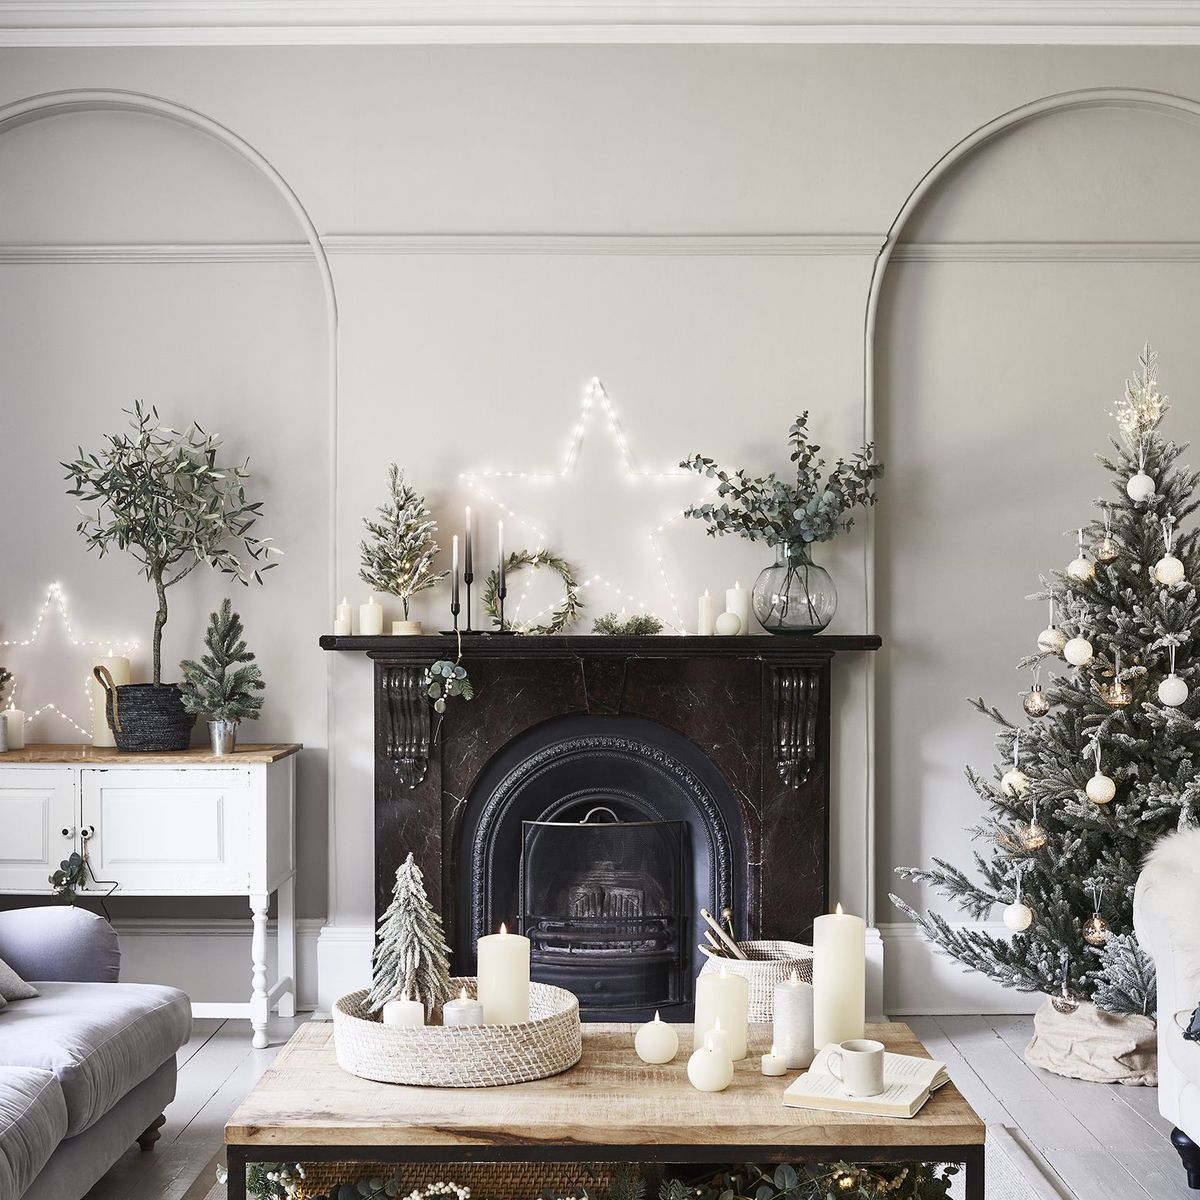 How to Decorate With Silver & White for Christmas - Sanctuary Home Decor